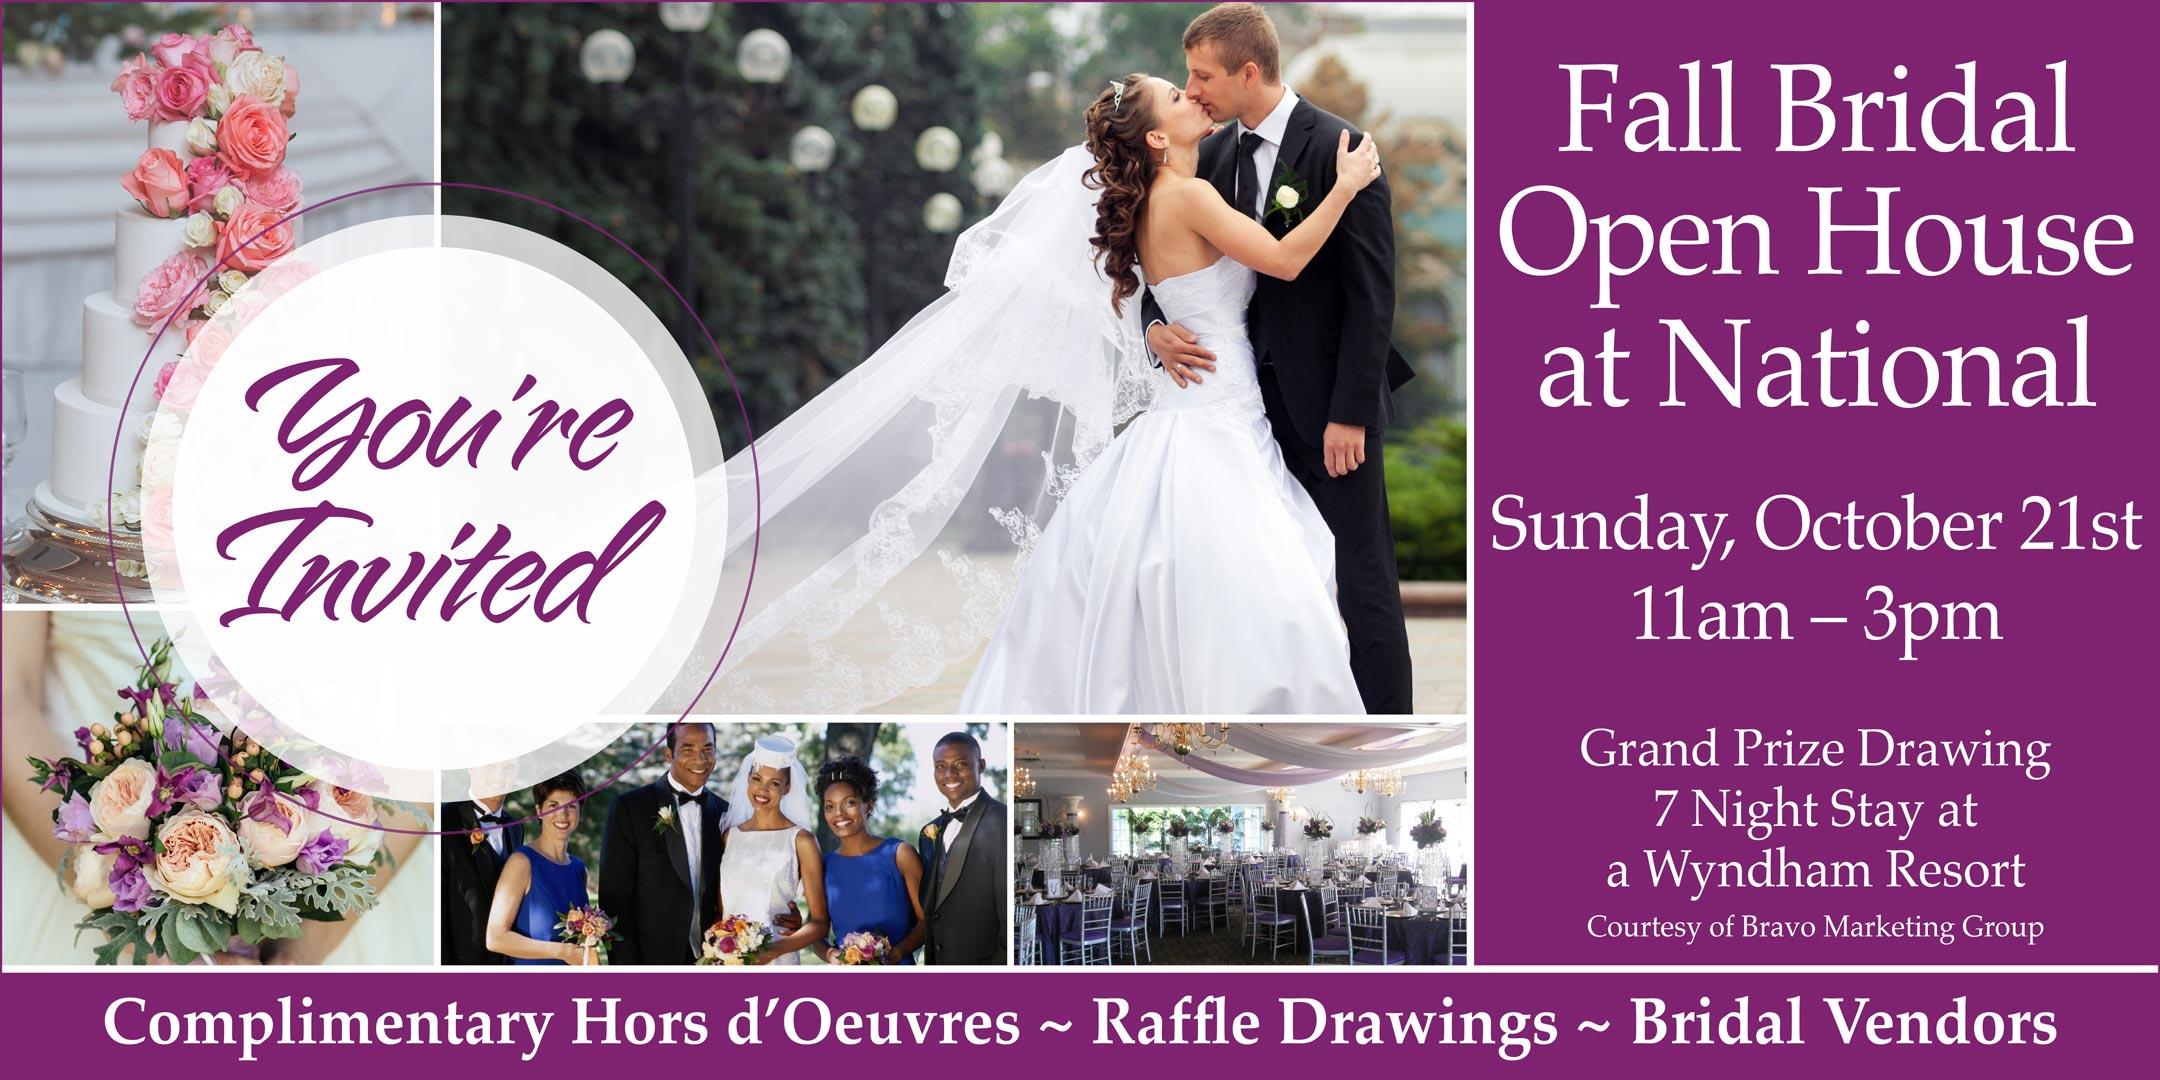 Fall Bridal Open House at National Golf Club